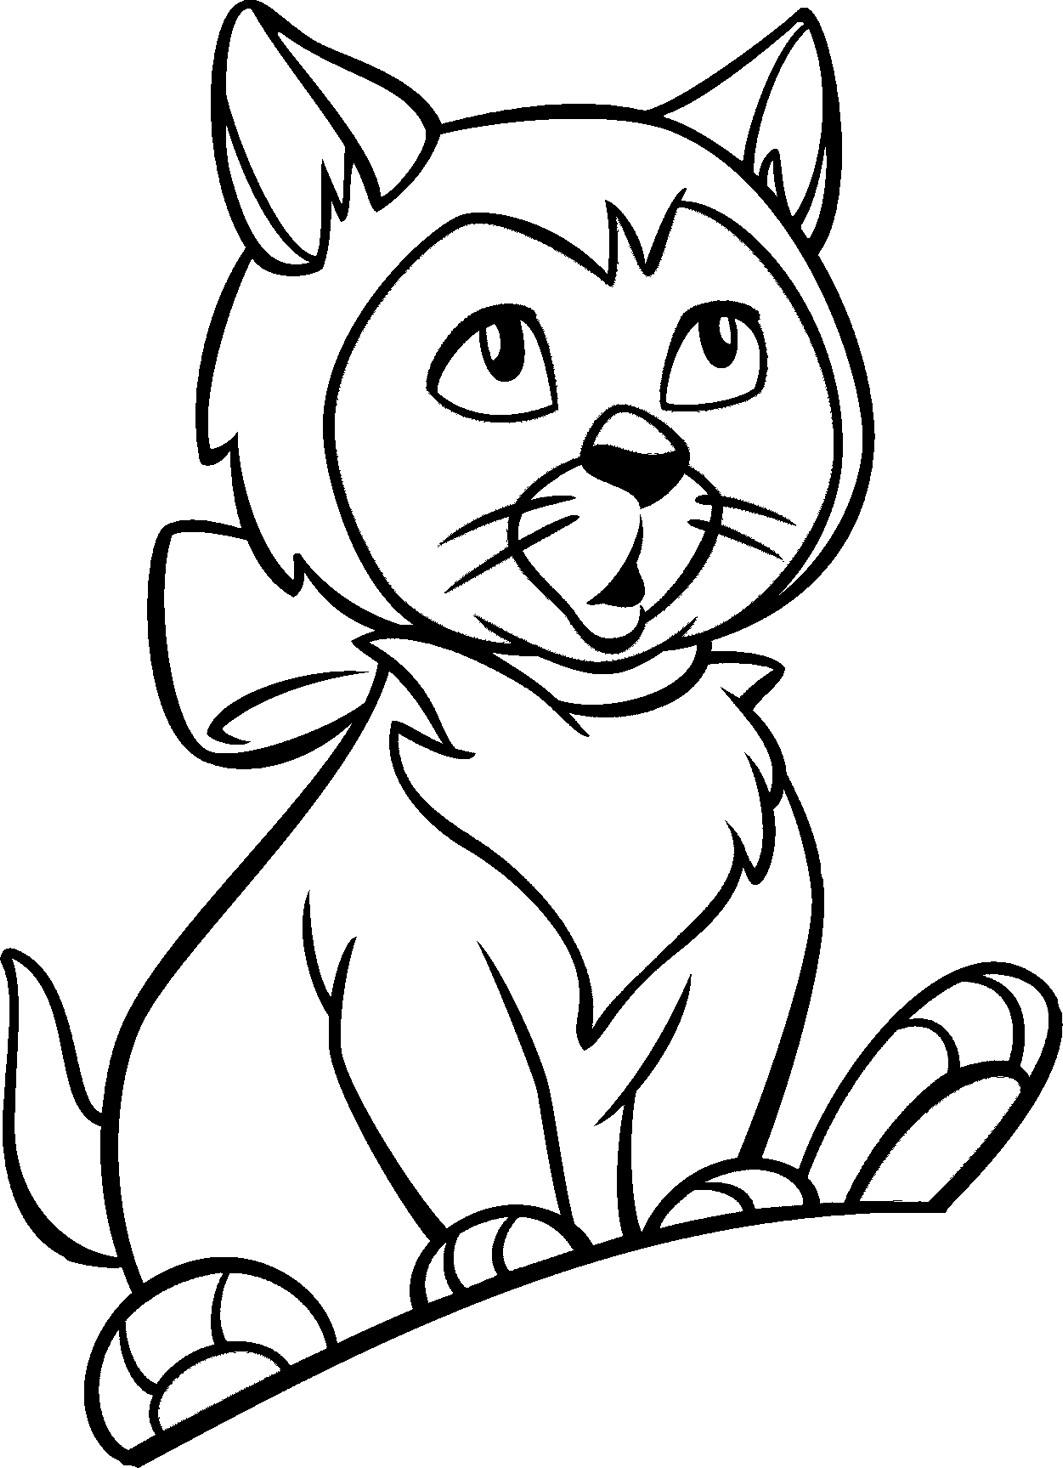 Coloring Sheets For Children
 Coloring Pages for Kids Cat Coloring Pages for Kids